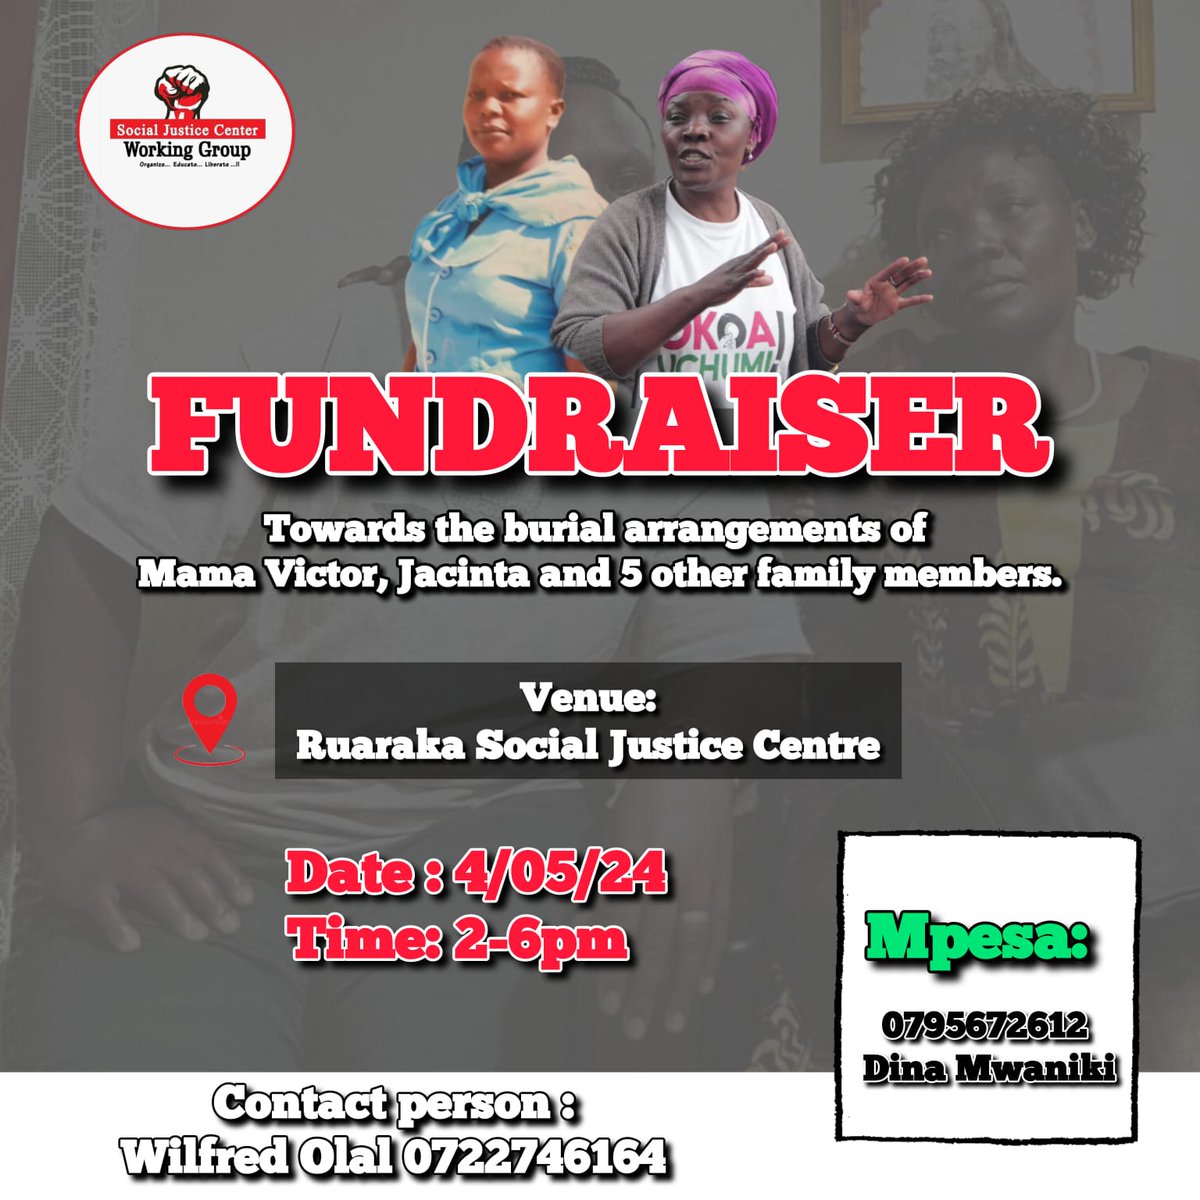 They gave their lives towards fighting for the Rights of others. Unfortunately their lives was cut short after raging floods attacked their houses in Mathare. It is time we support these fallen HRDs and accord them a befitting send off. Contribution via 0795672612 Diana Mwaniki